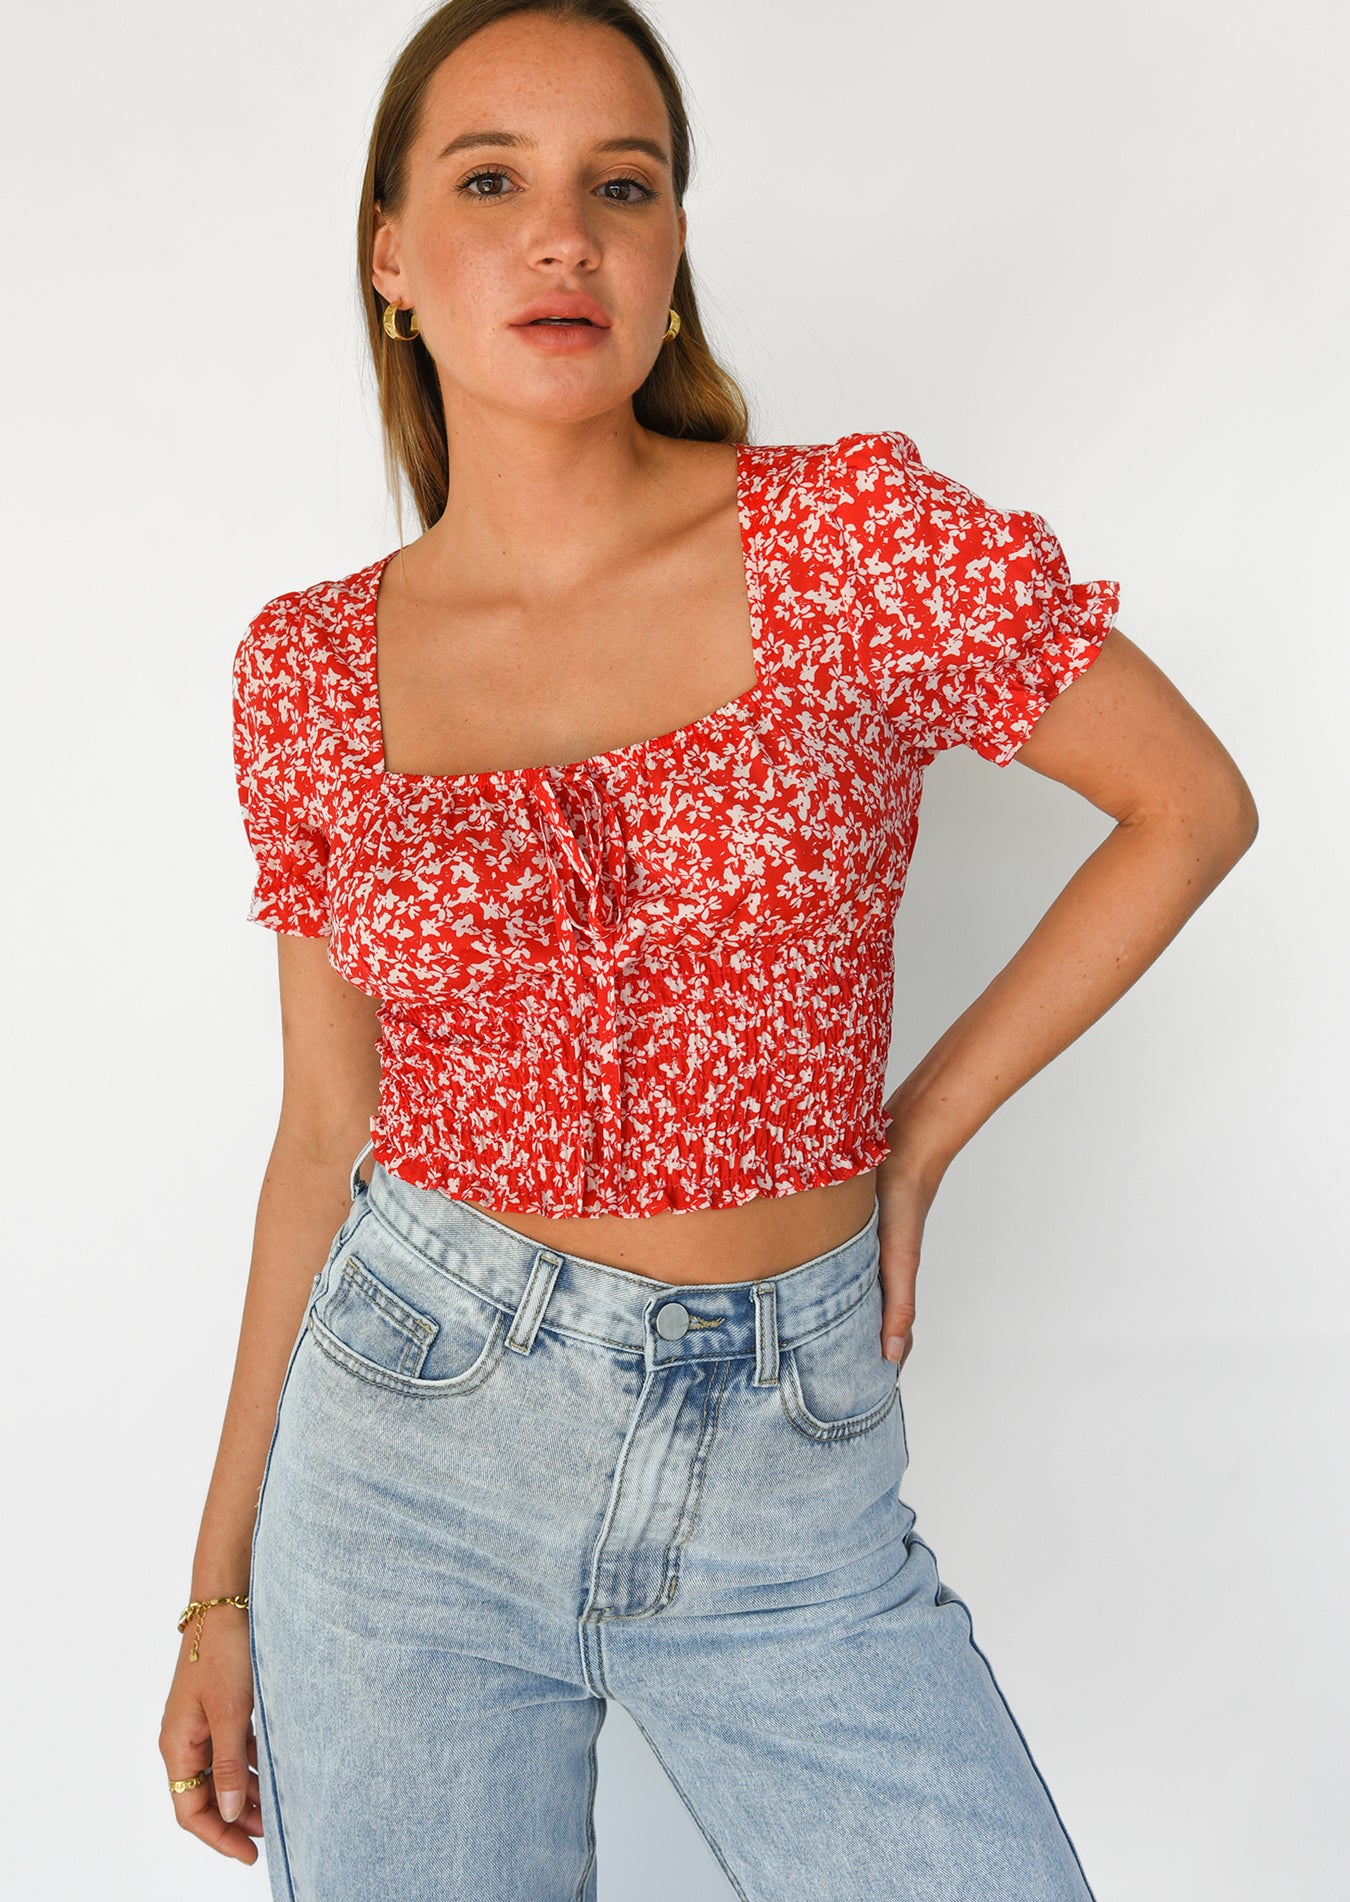 Floral square neck top in red